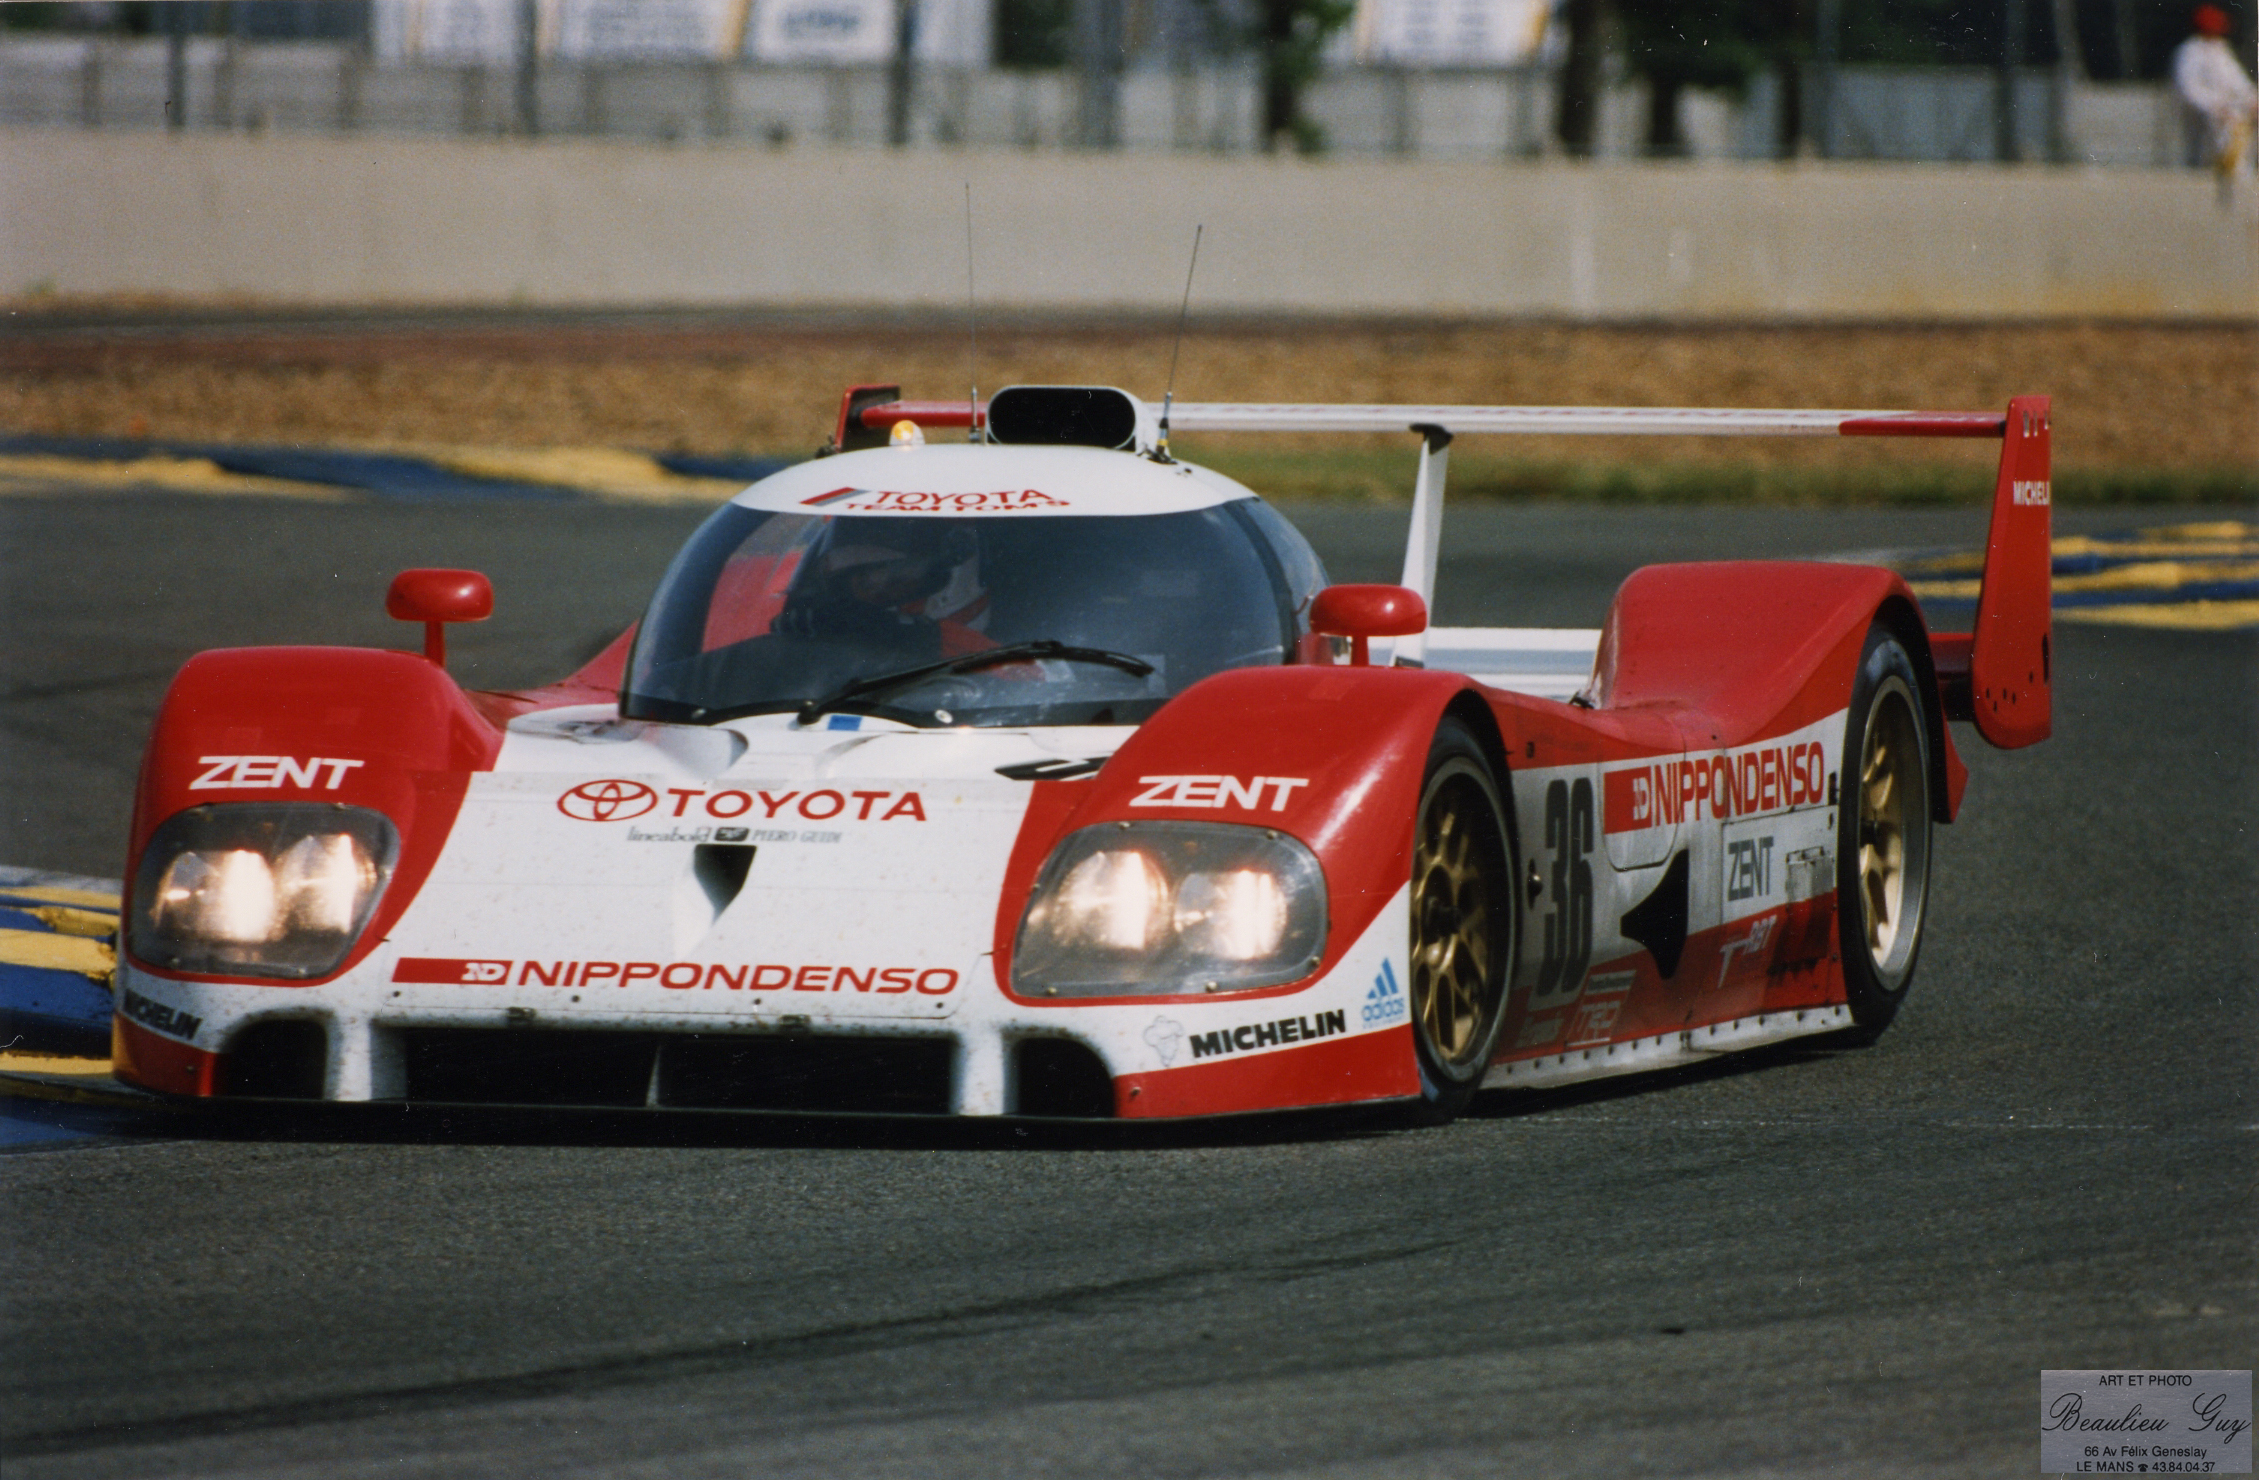 The 1993 TS010 was slightly different but still offered all the necessary power. A truly daunting machine. Tony Southgate again led the design team.